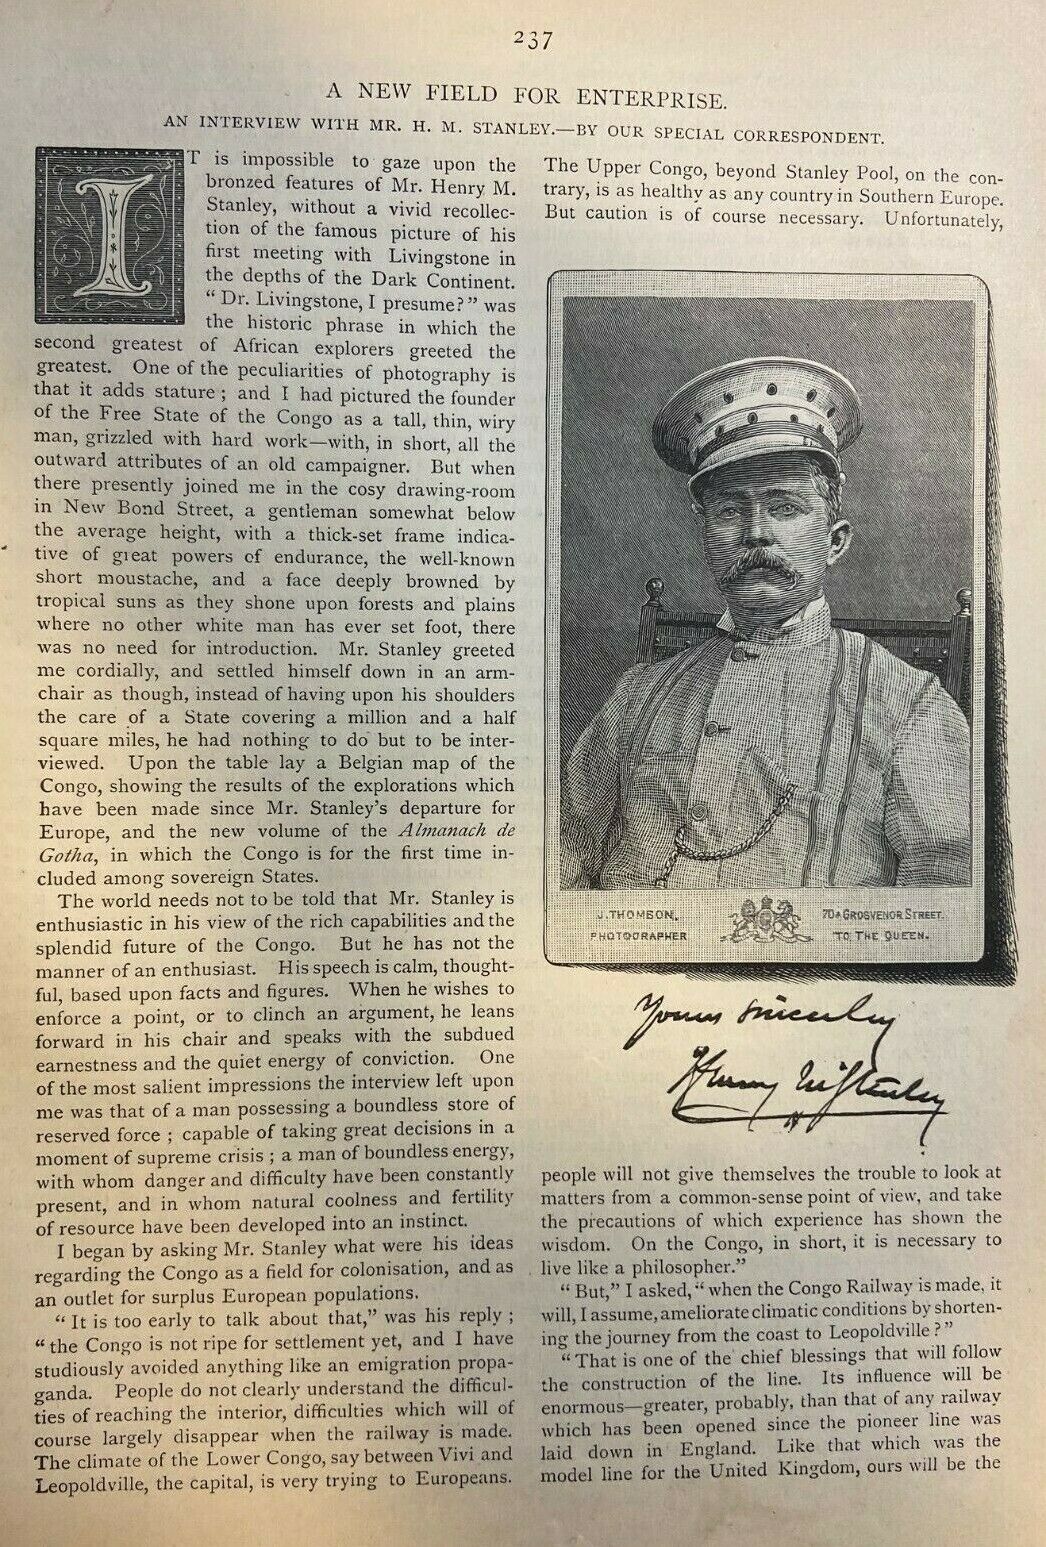 1886 Interview With Journalist Henry M. Stanley